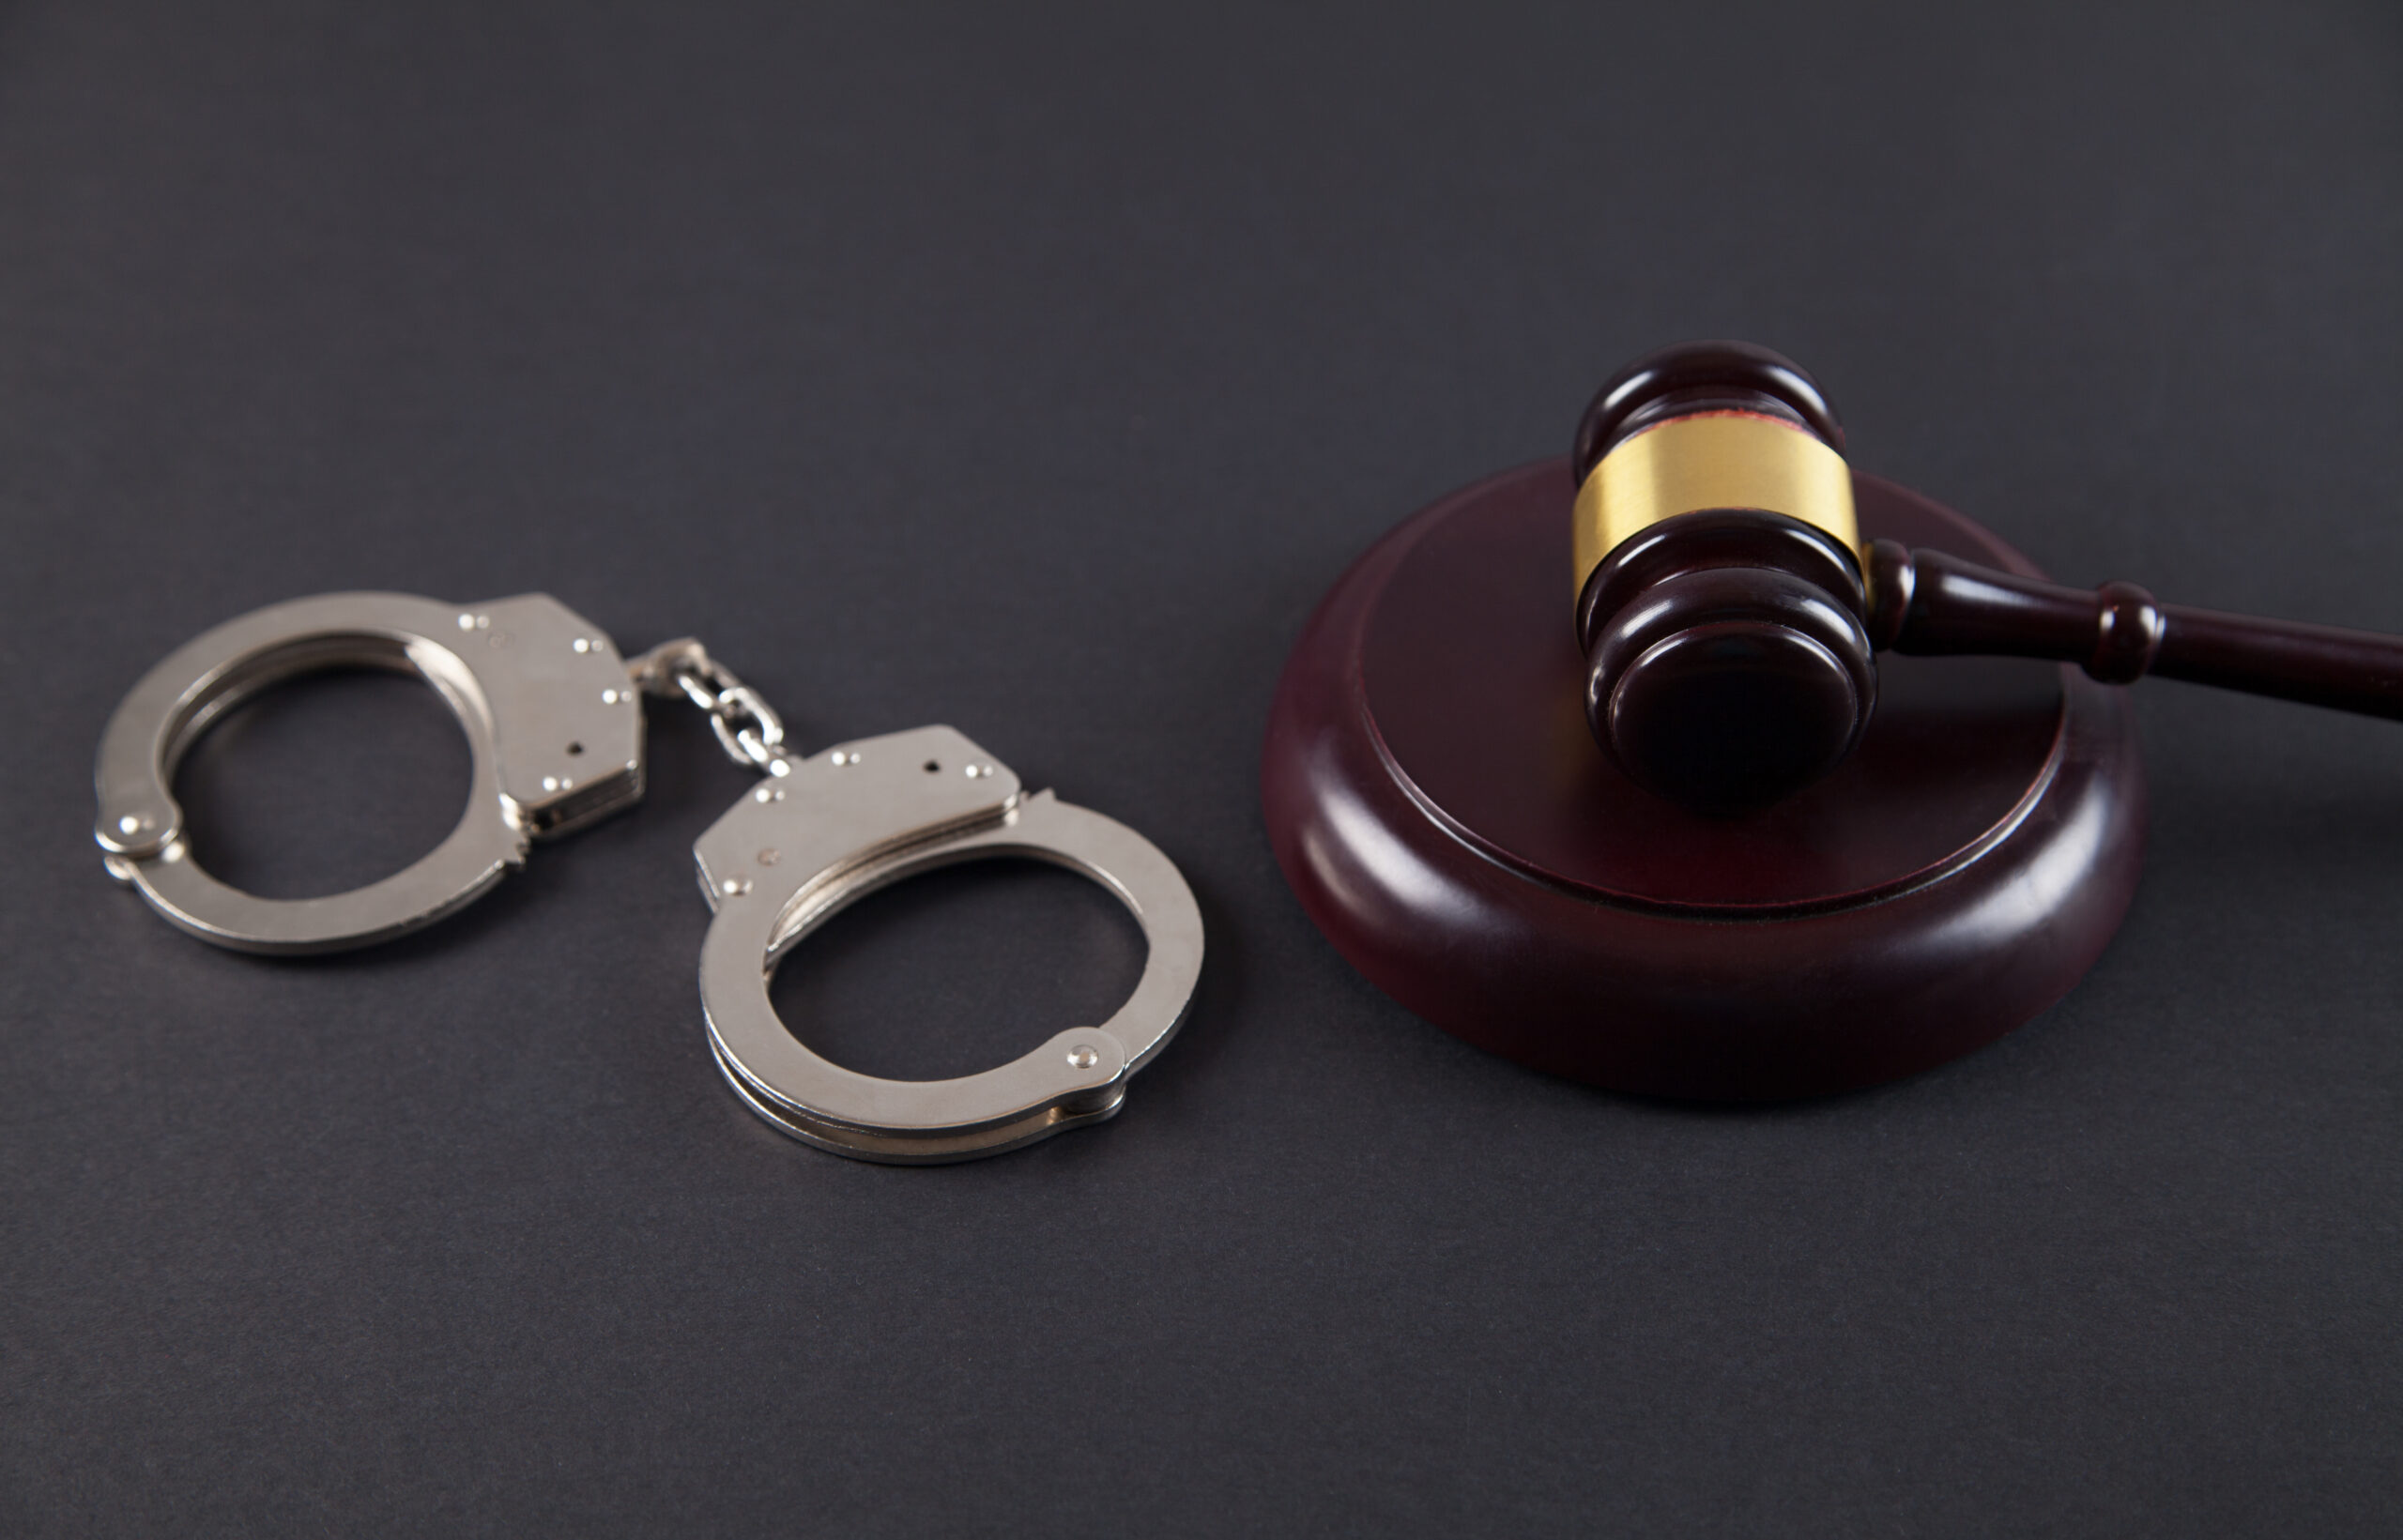 Police,Handcuffs,And,Judge,Gavel,On,An,Isolated,Black,Background.